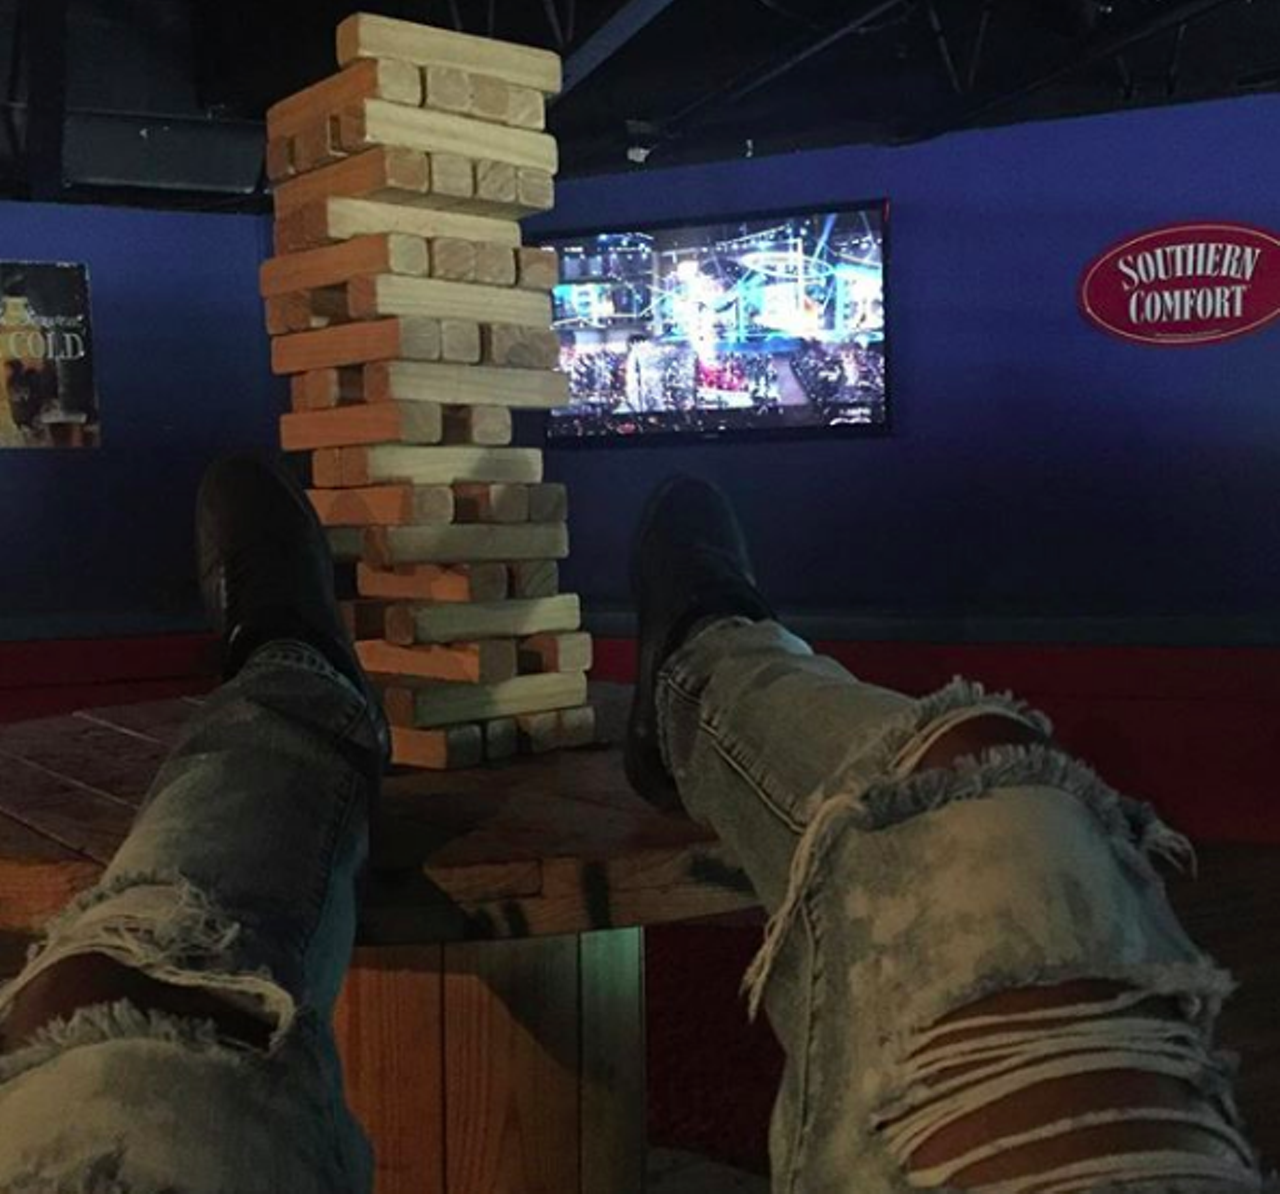 4th Quarter is a sports fan’s dream. The bar is spacious and accommodating with enough room to house multiple wide screens and tables large enough for intense games of giant checkers, Cenga and Connect 4. The bar also houses foosball and air-hockey tables.
Photo via Instagram / mrkennybaker